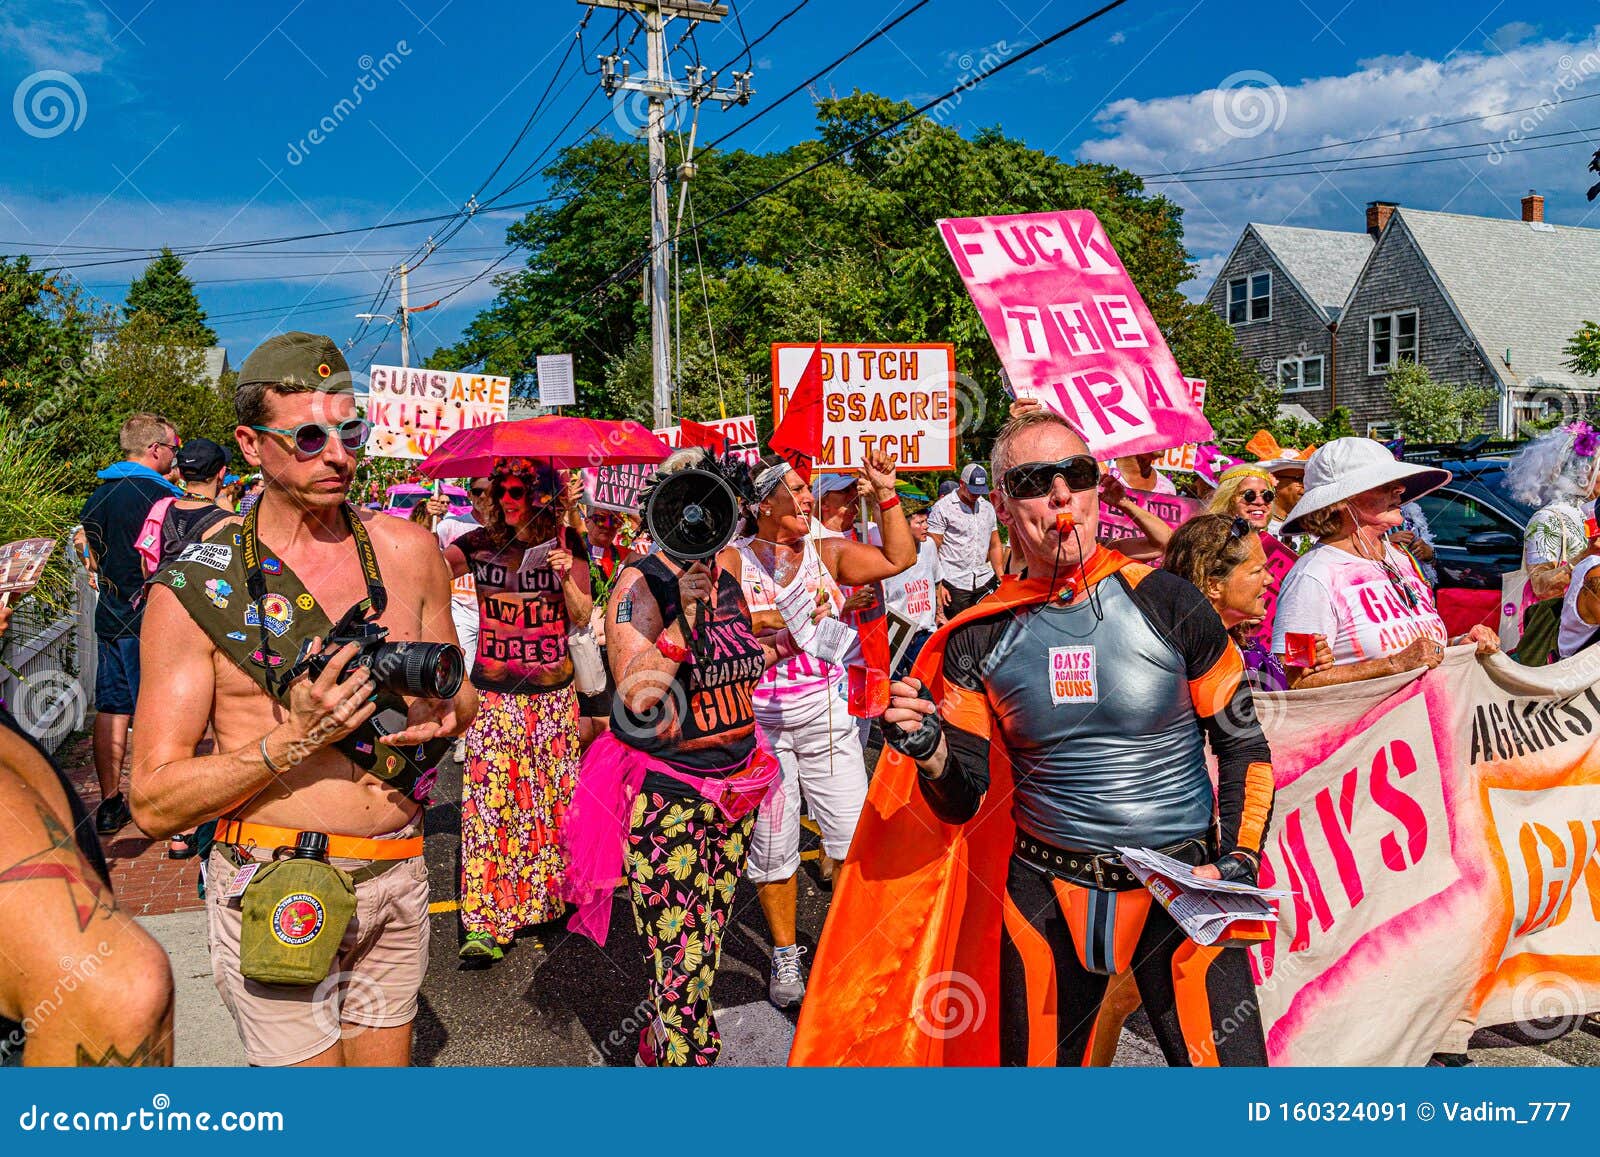 Provincetown, Massachusetts US August 22, 2019 People Walking in the